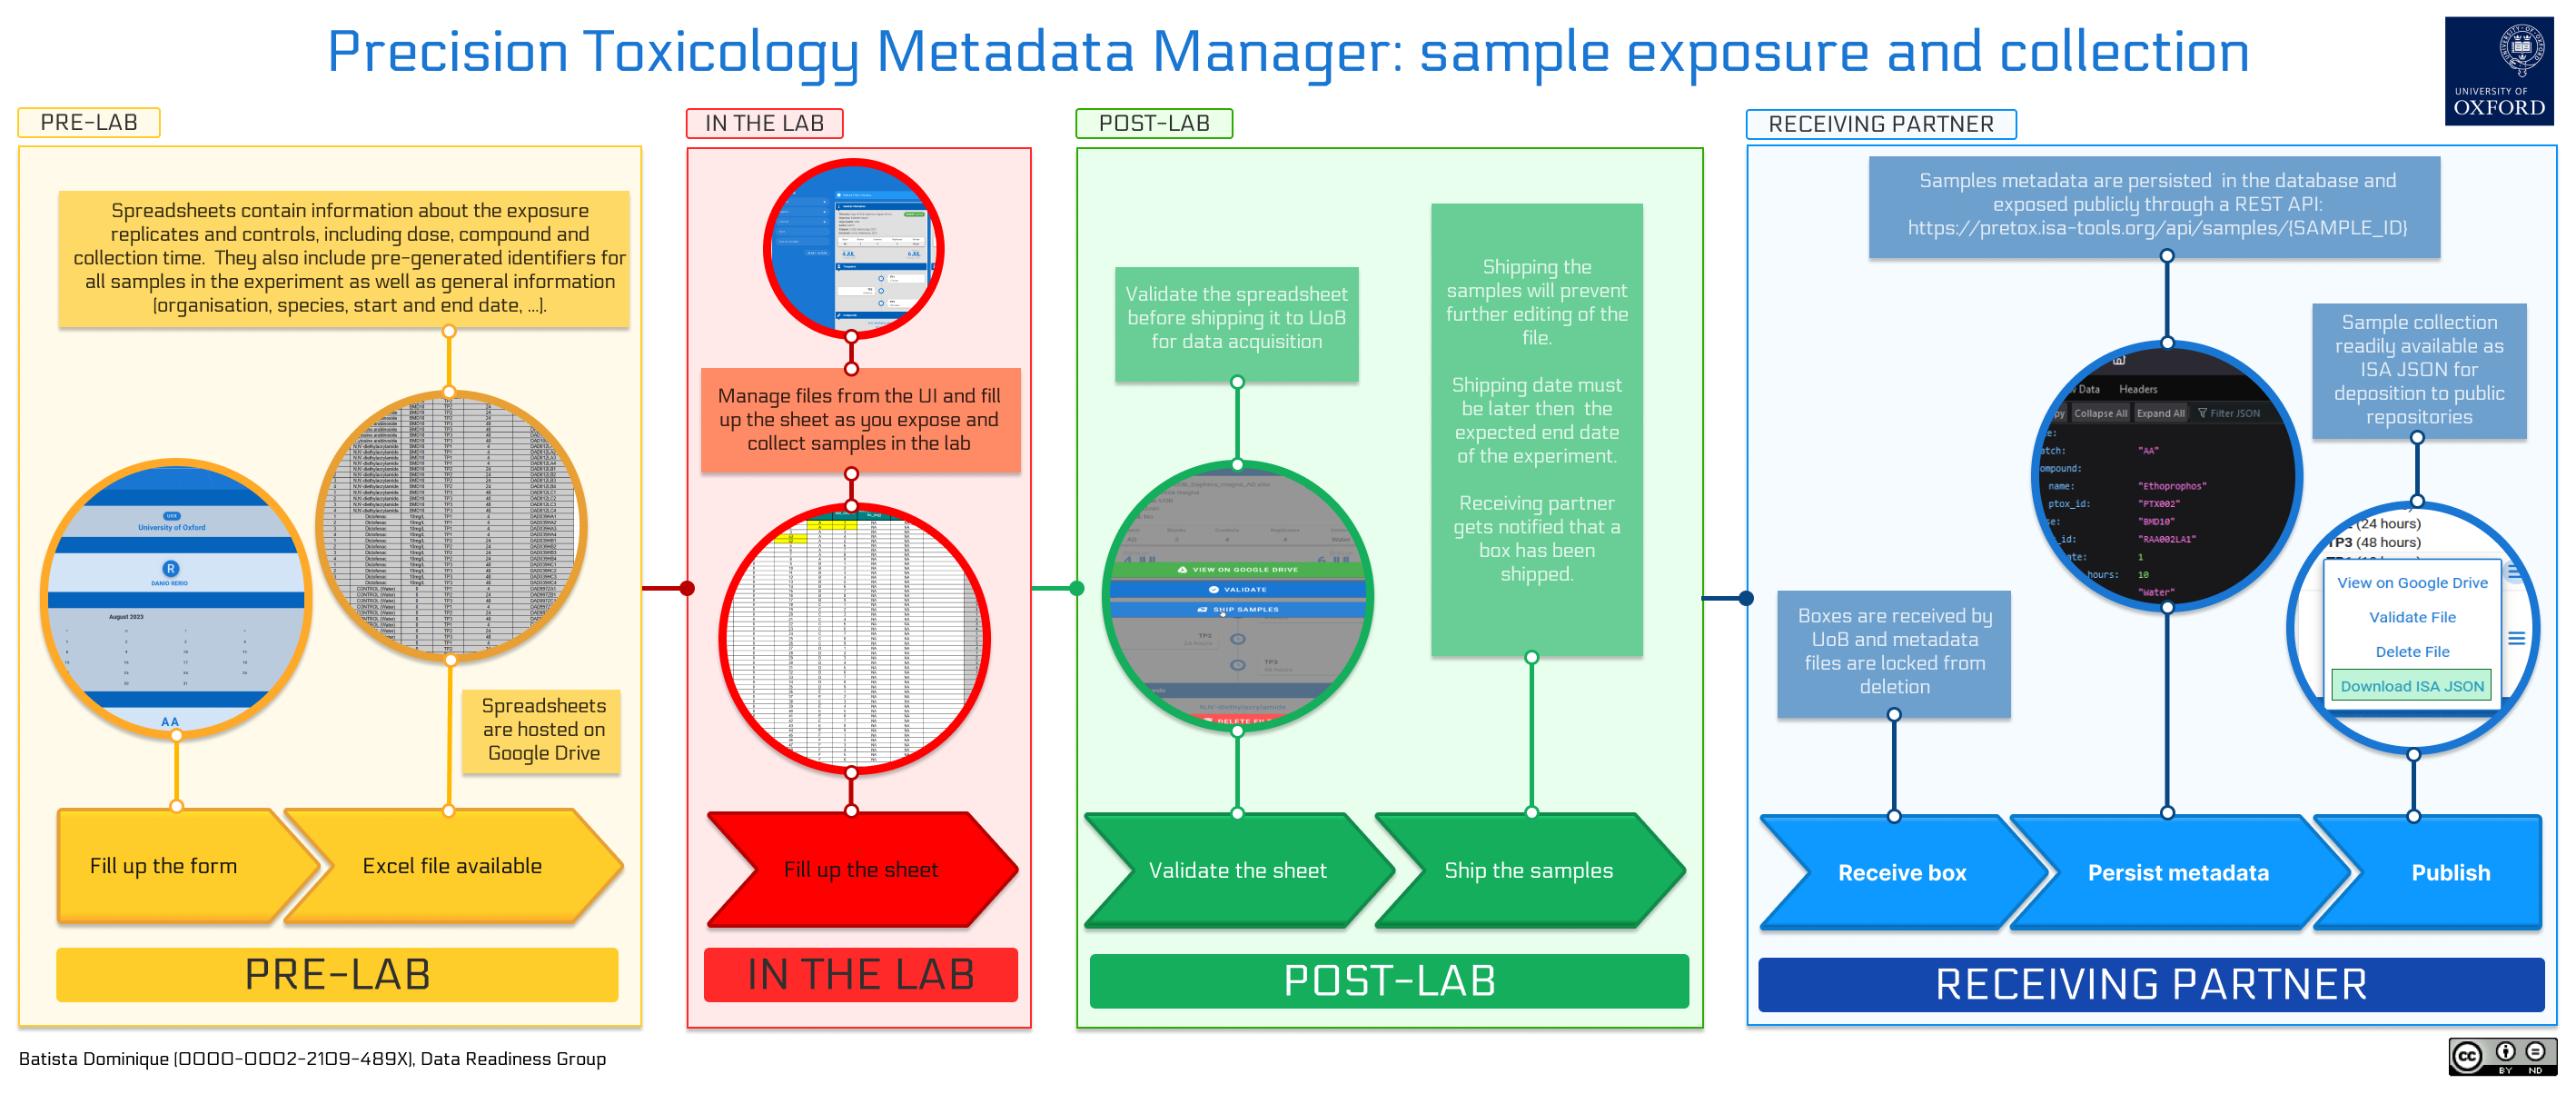 Metadata pipeline for sample exposure and collection